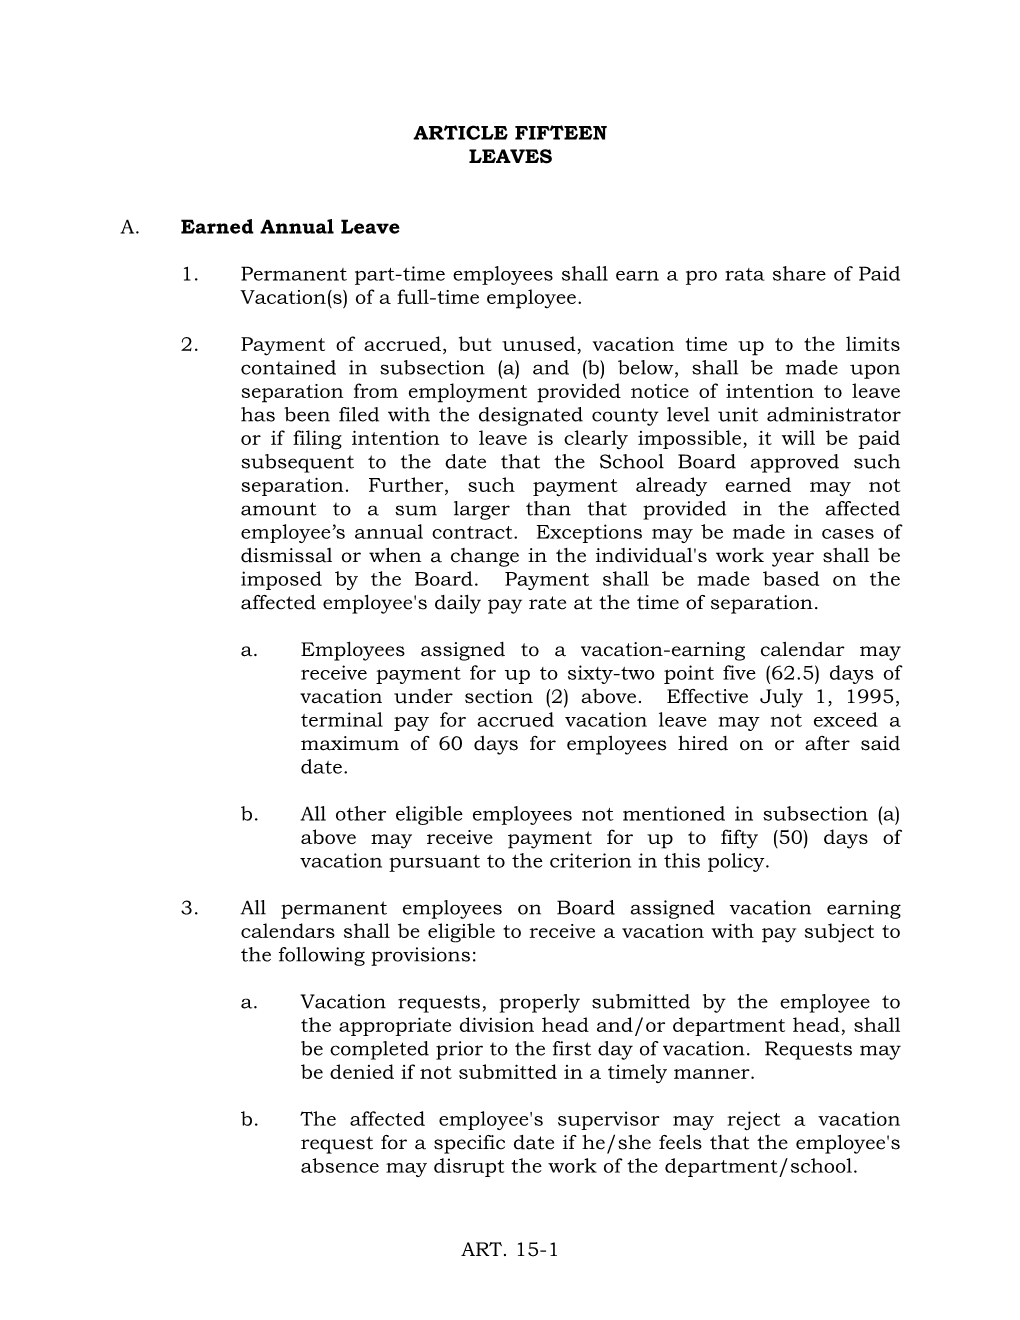 ART. 15-1 ARTICLE FIFTEEN LEAVES A. Earned Annual Leave 1